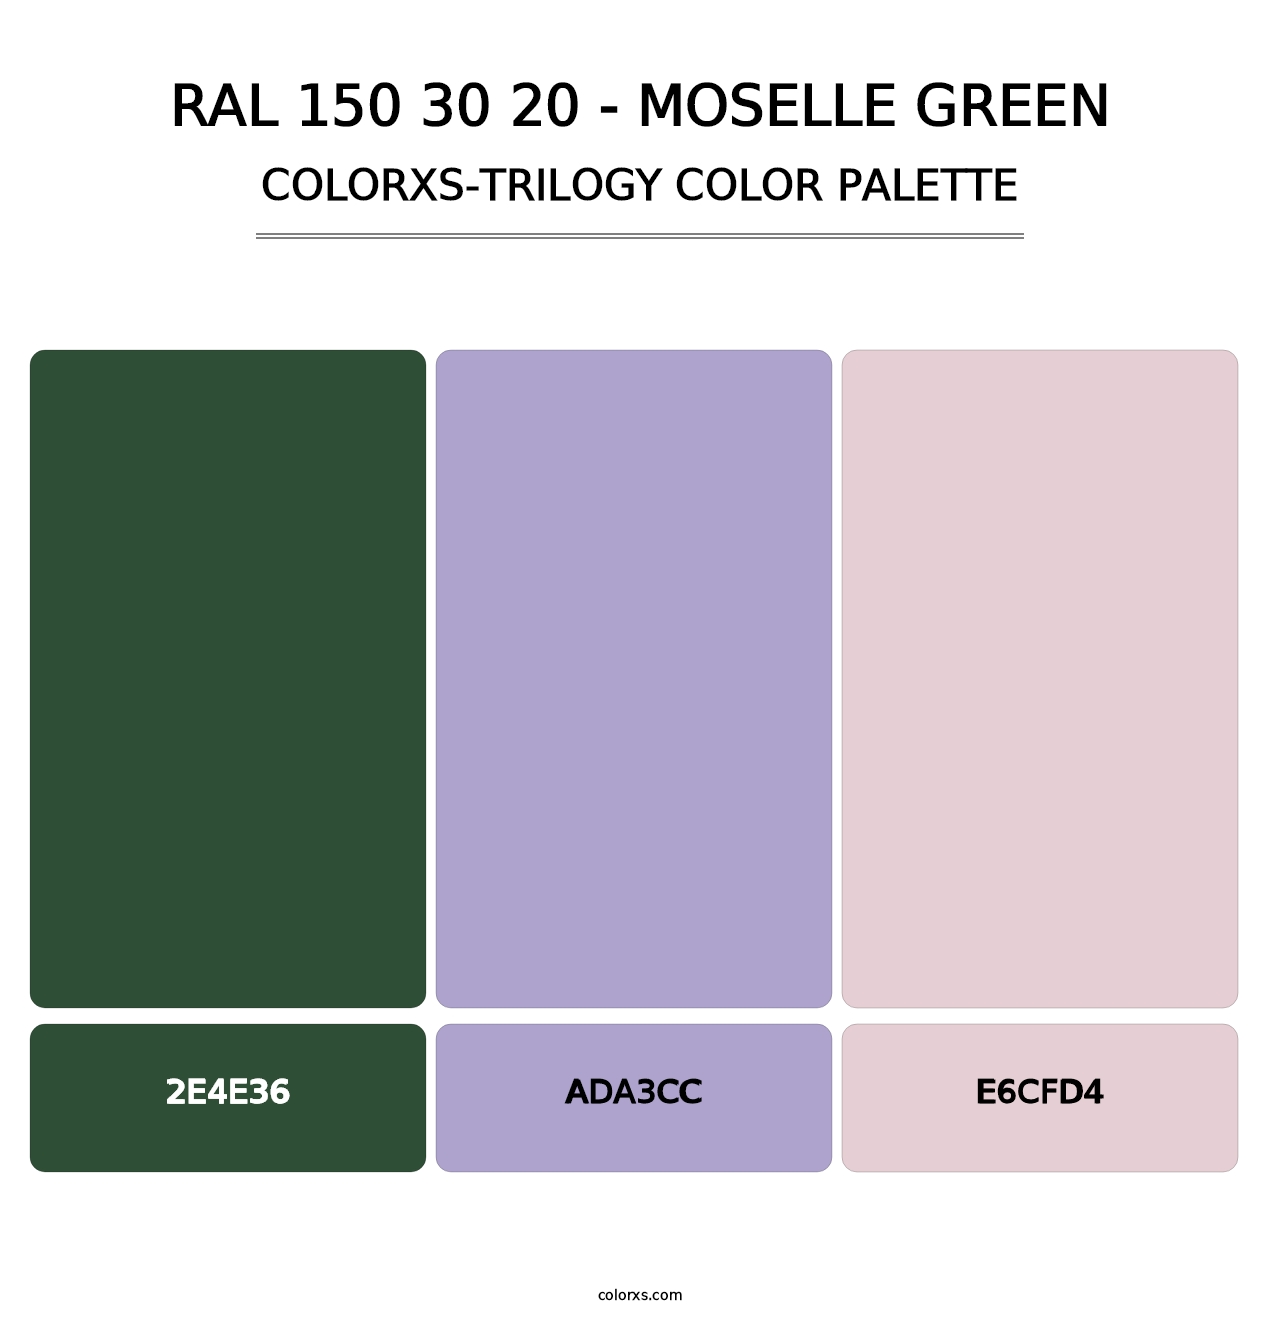 RAL 150 30 20 - Moselle Green - Colorxs Trilogy Palette